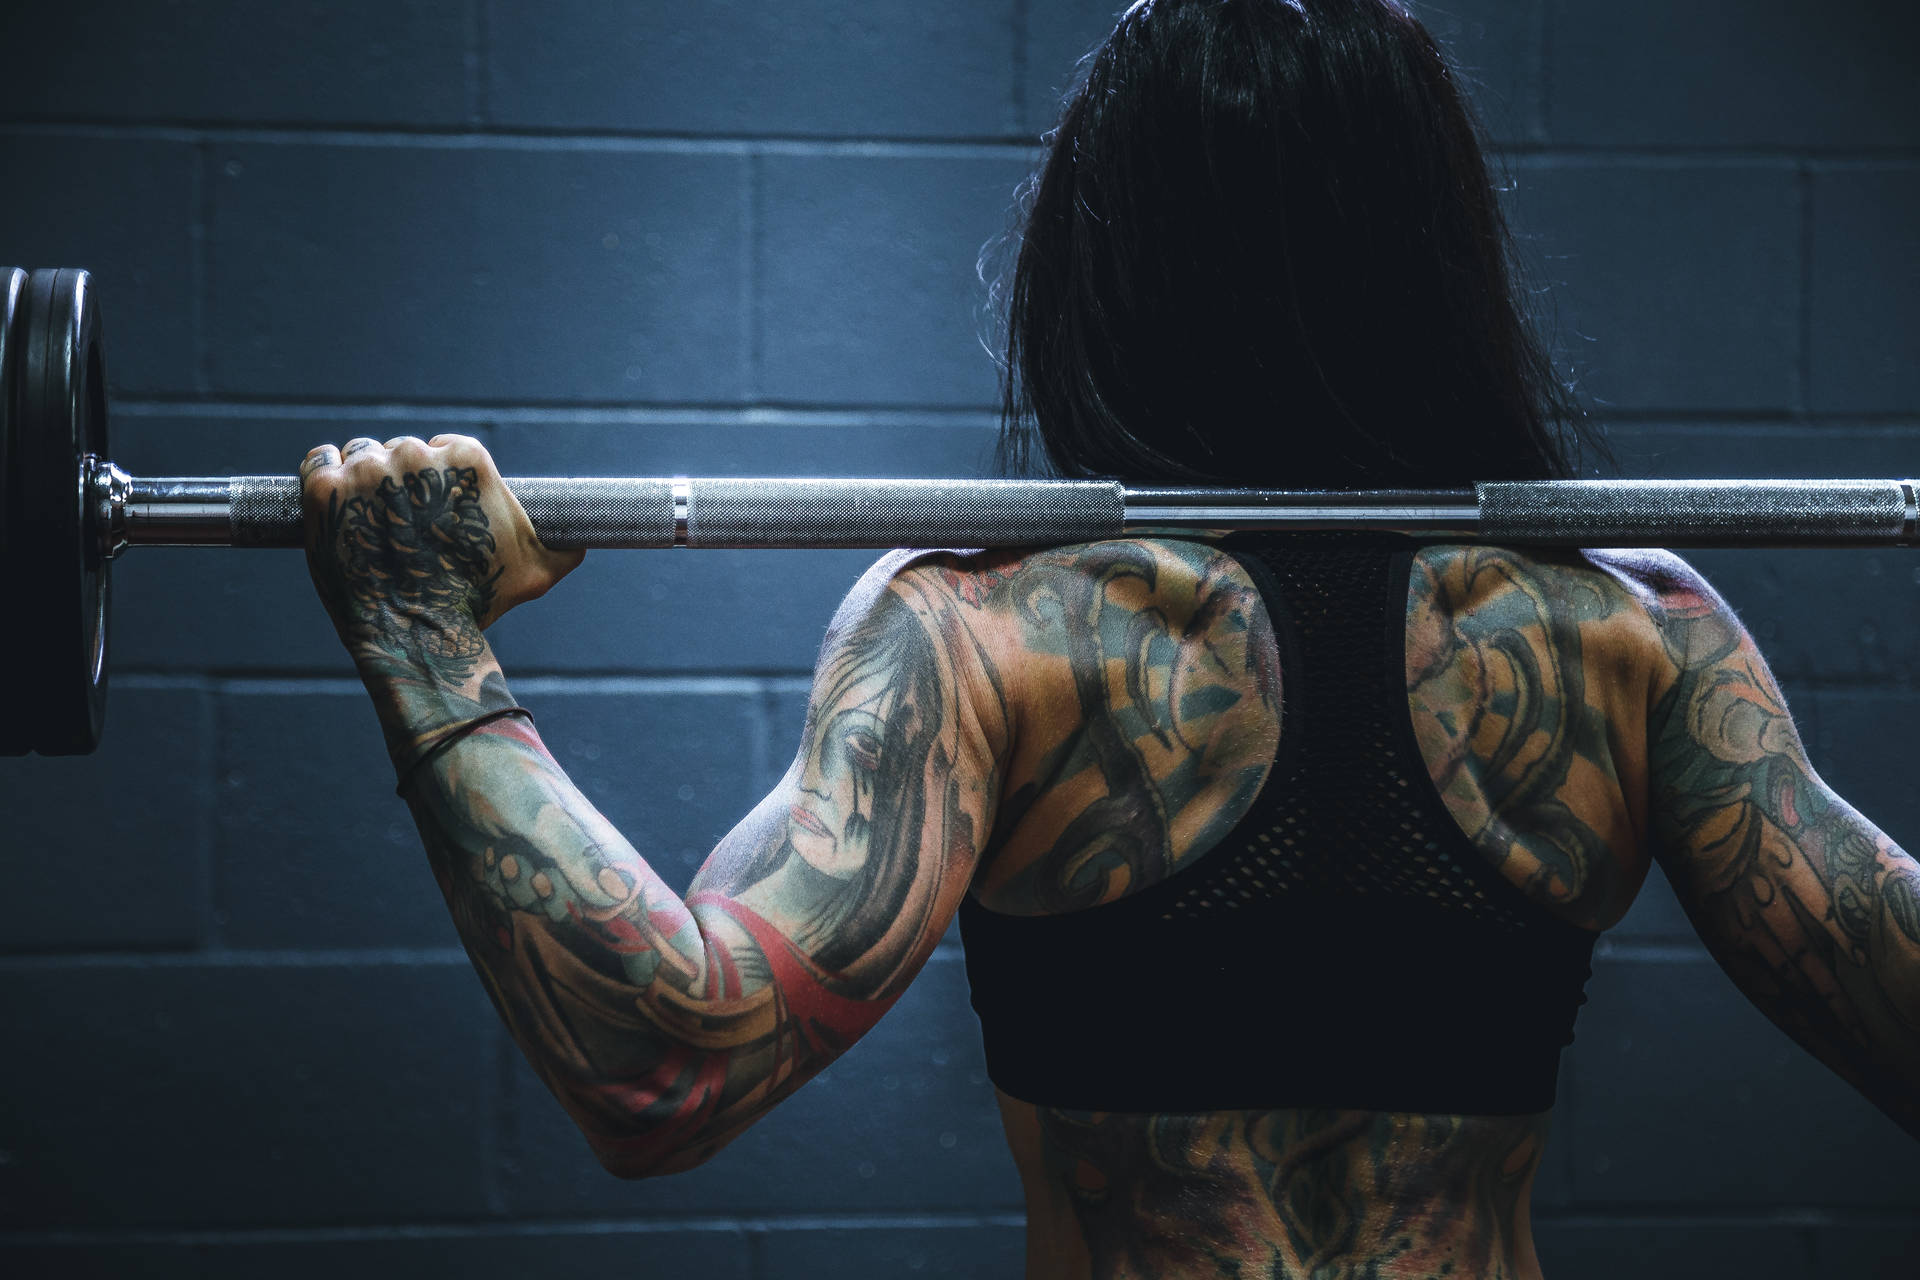 Weightlifting 5472X3648 Wallpaper and Background Image